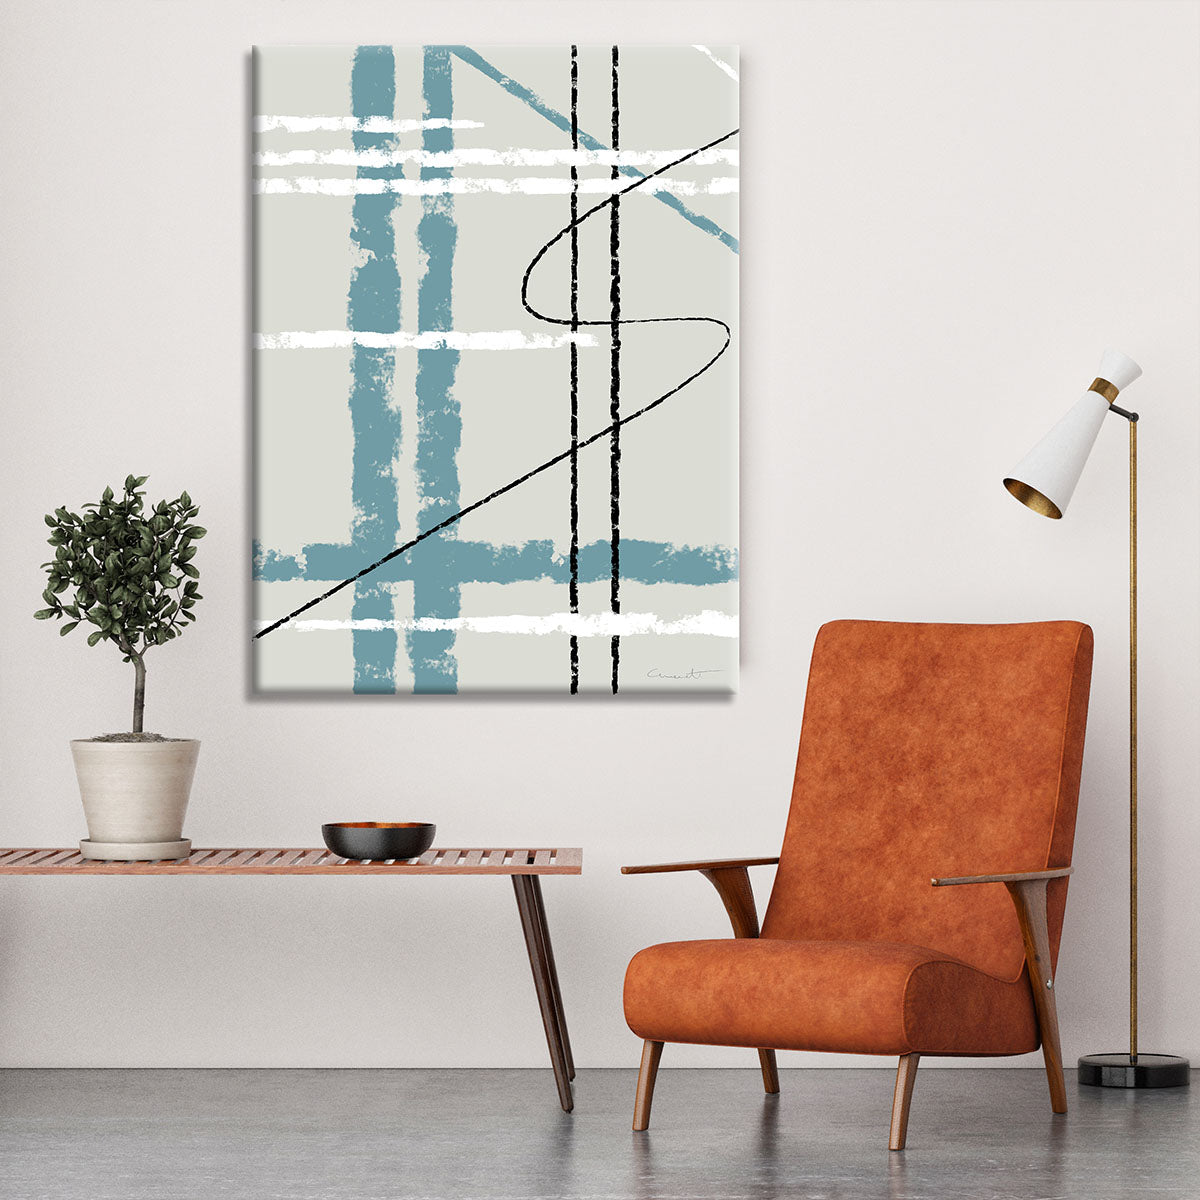 Messy Lines Canvas Print or Poster - 1x - 6